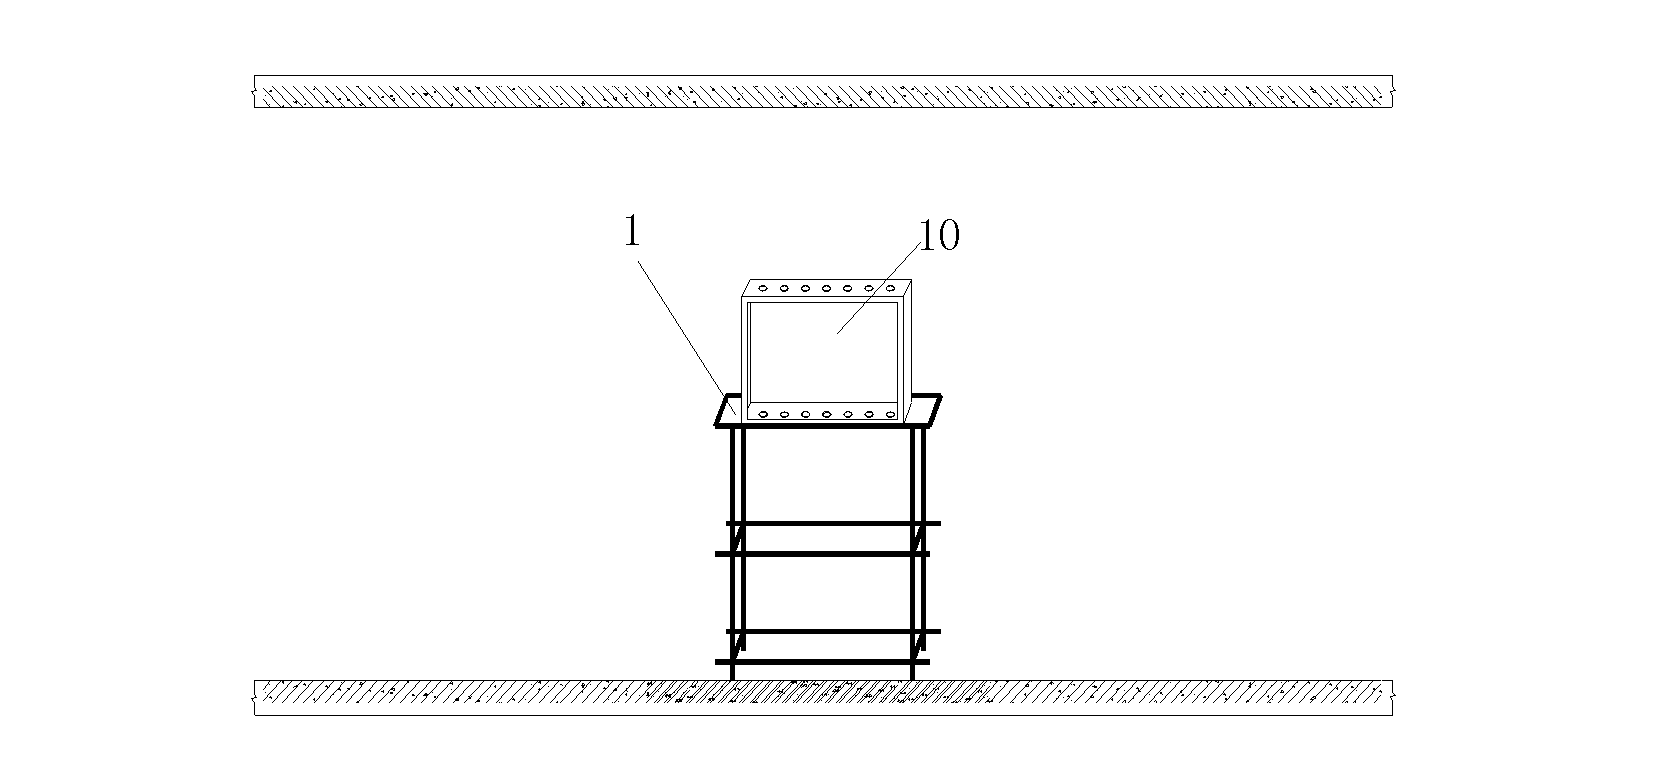 Pre-embedding construction method for distribution box with rows of pipes, and support device